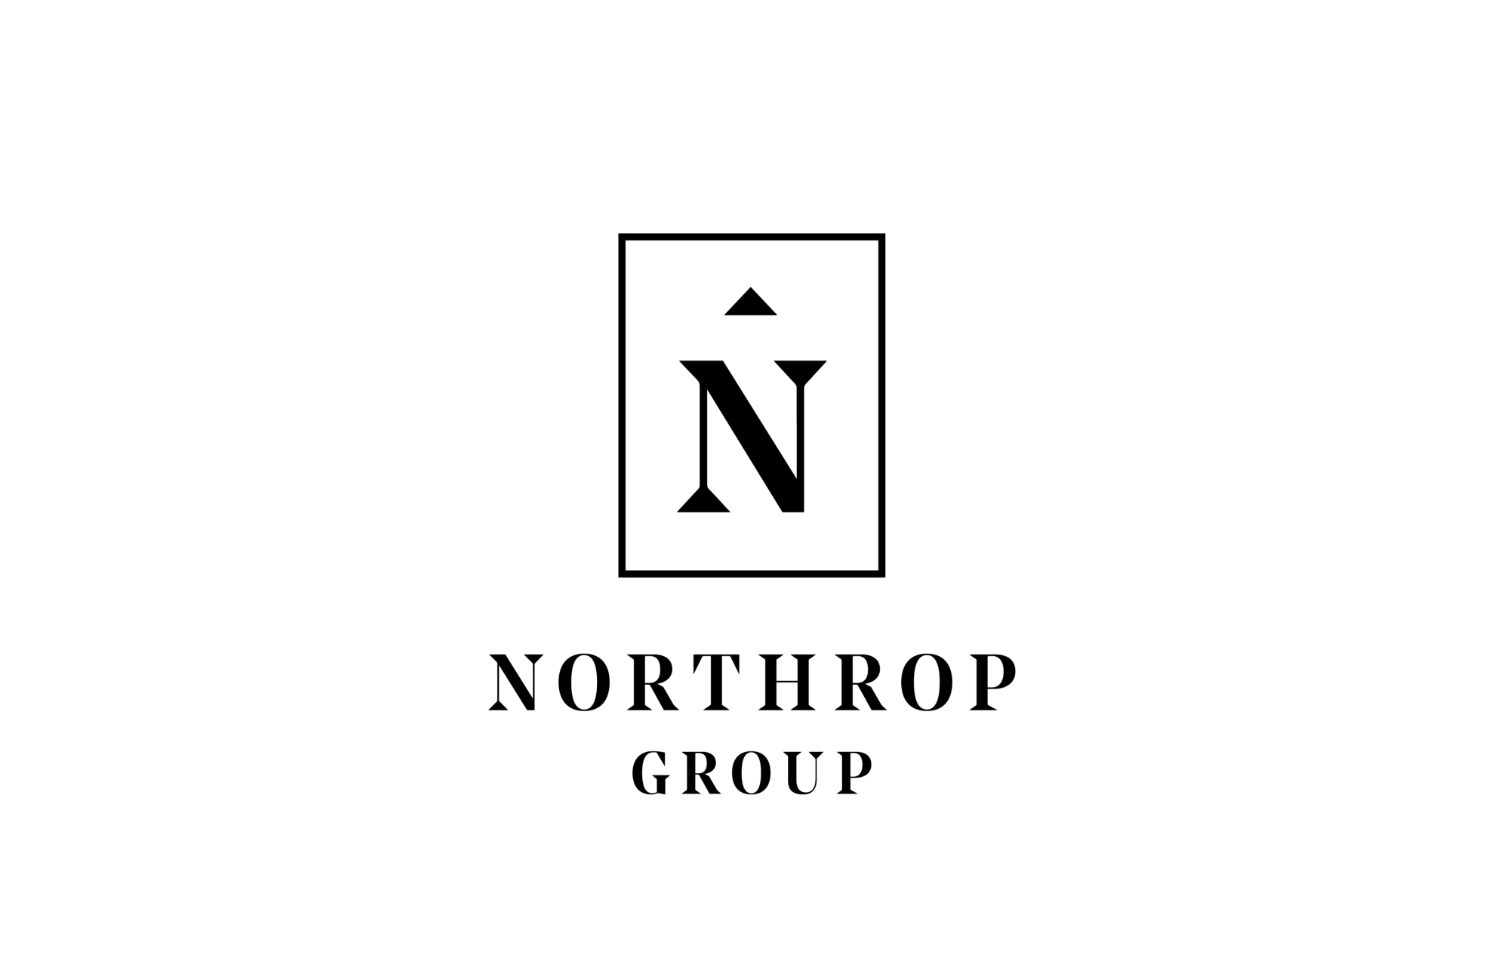 A text banner by Northrop Group